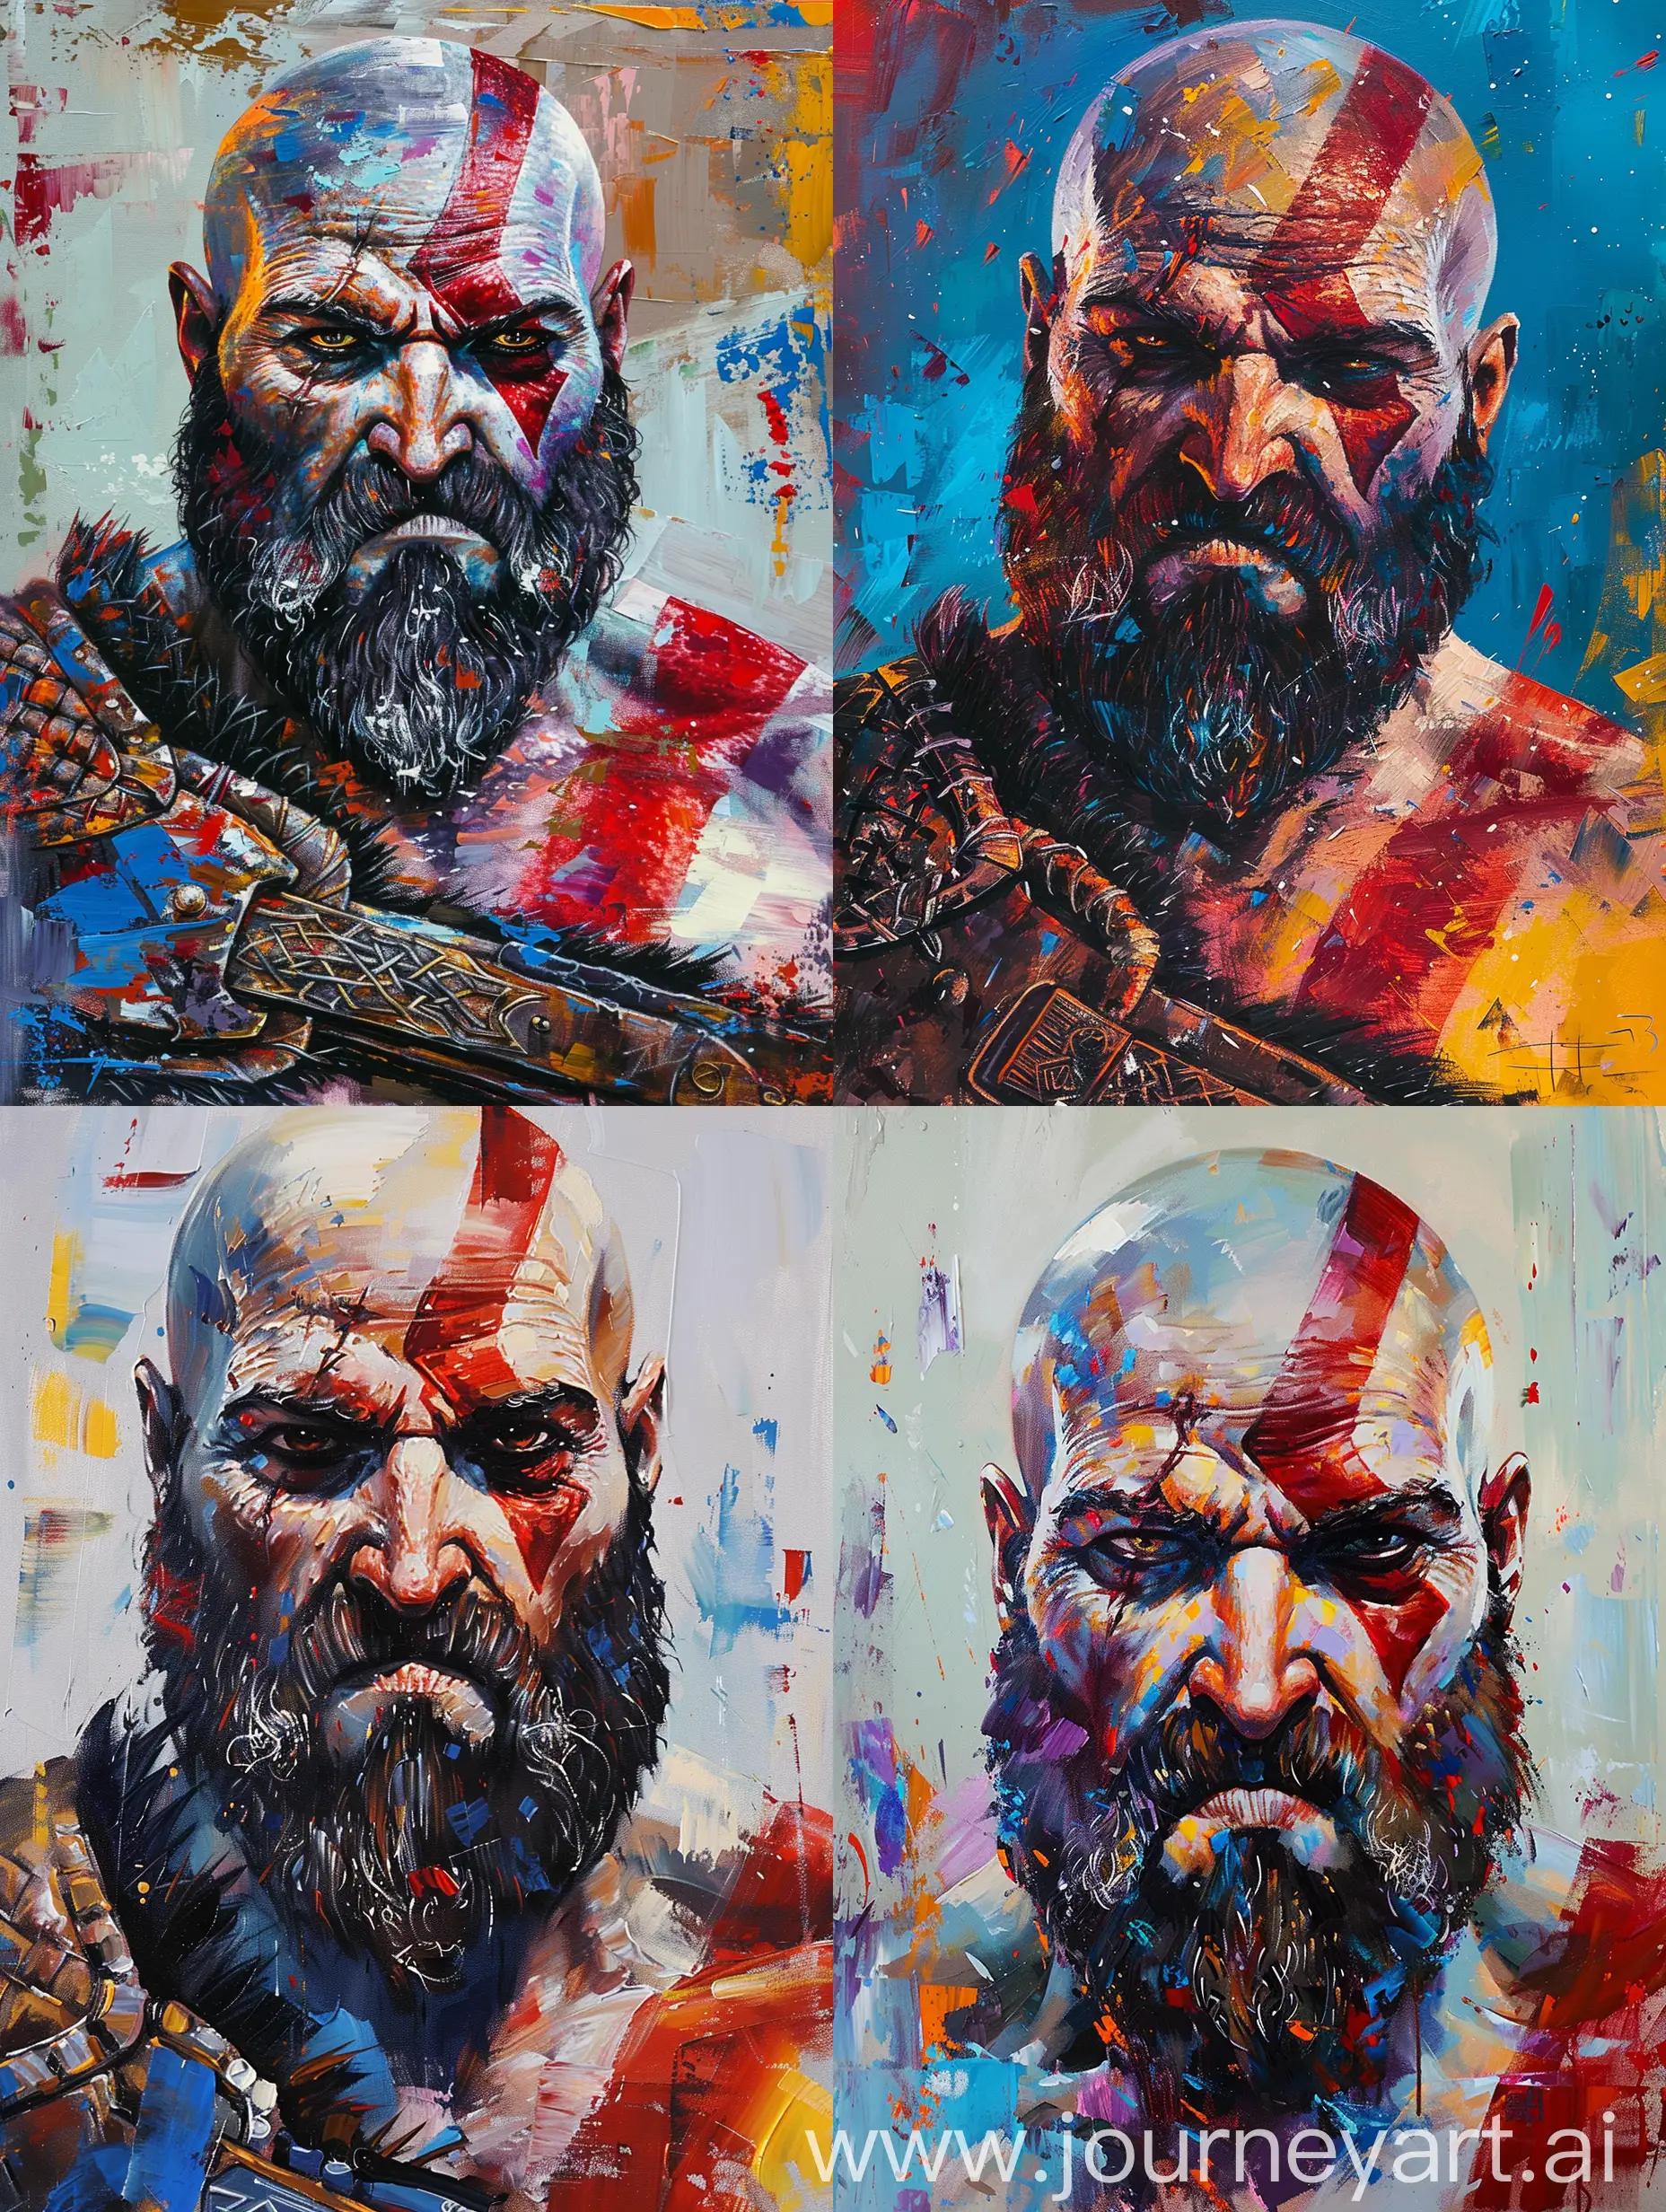 Kratos-from-God-of-War-in-Star-Wars-Style-Vibrant-Oil-Painting-with-Visible-Brush-Strokes